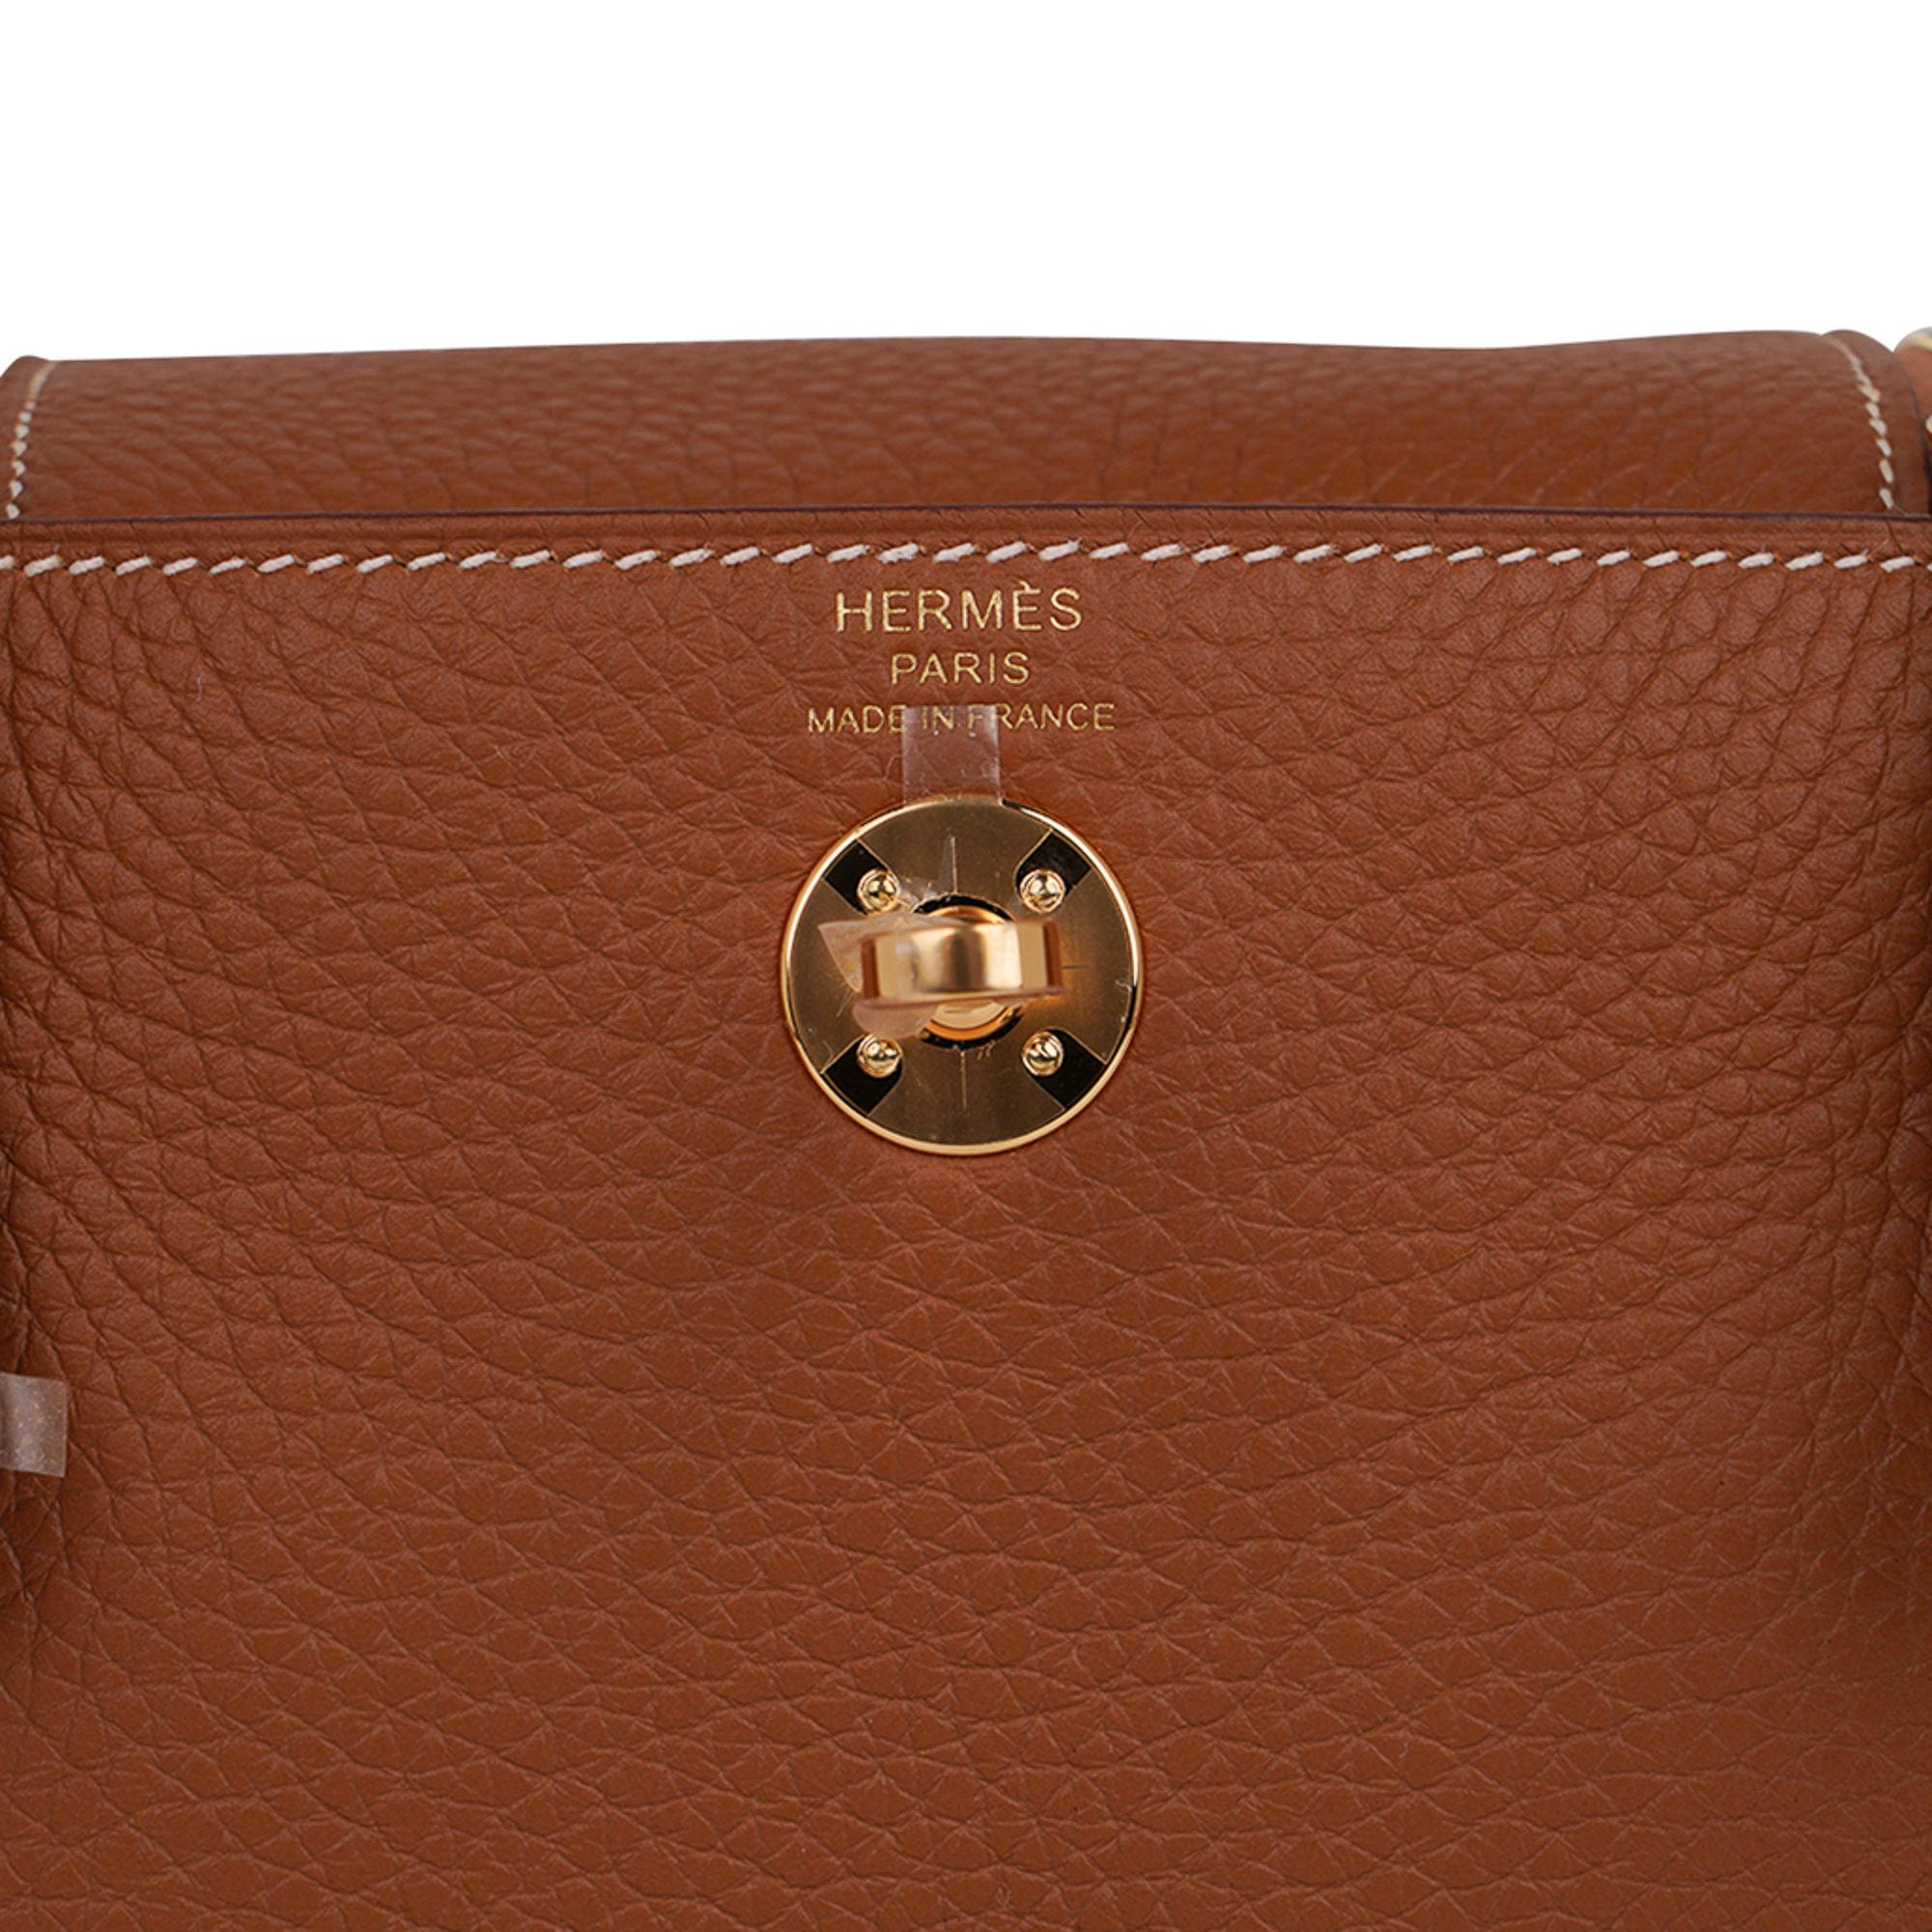 LINDY 20 (MINI) CLEMENCE LEATHER ROUGE GRENAT WITH GOLD HARDWARE (GHW) –  APHRODITE'S BAG™